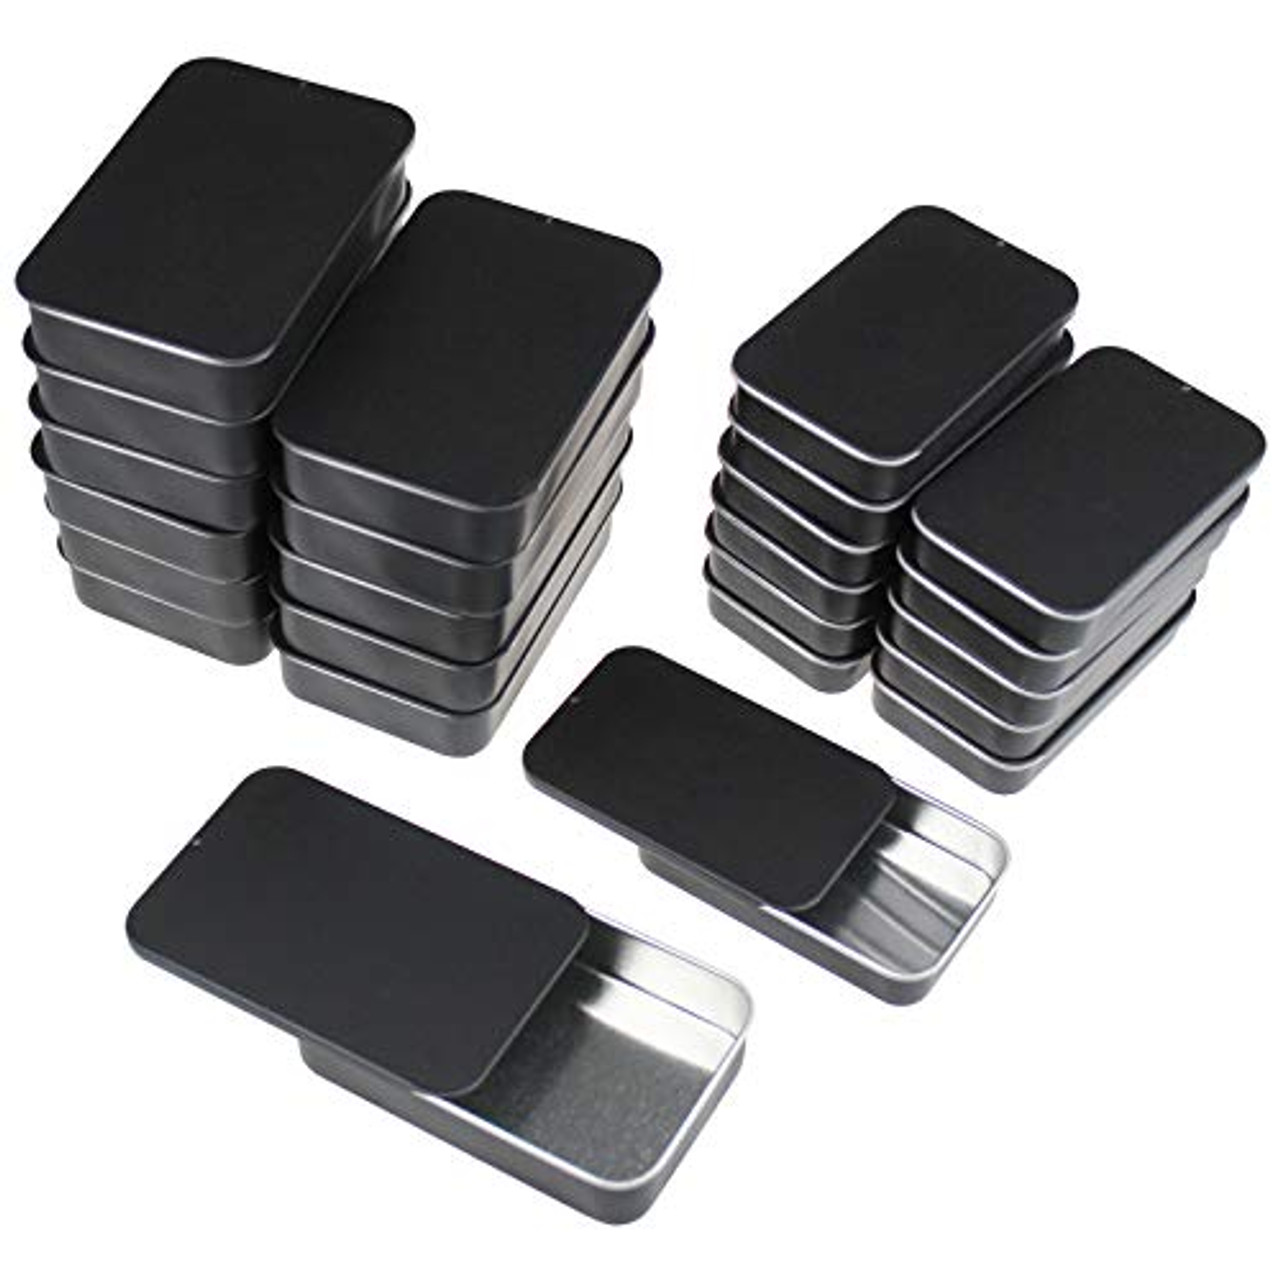 24-Pack Slide Top Rectangular Metal Tin Containers for Candies Jewelry  Crafts Pills Lip Balm Storage Survival Kit, Mixed Sizes (Black)